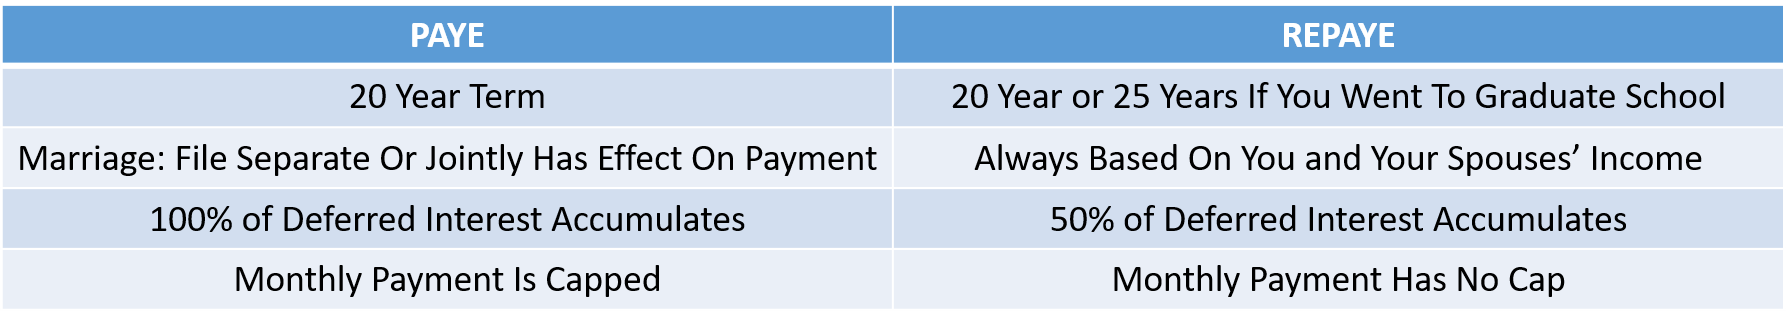 PAYE vs REPAYE Summary of Differences